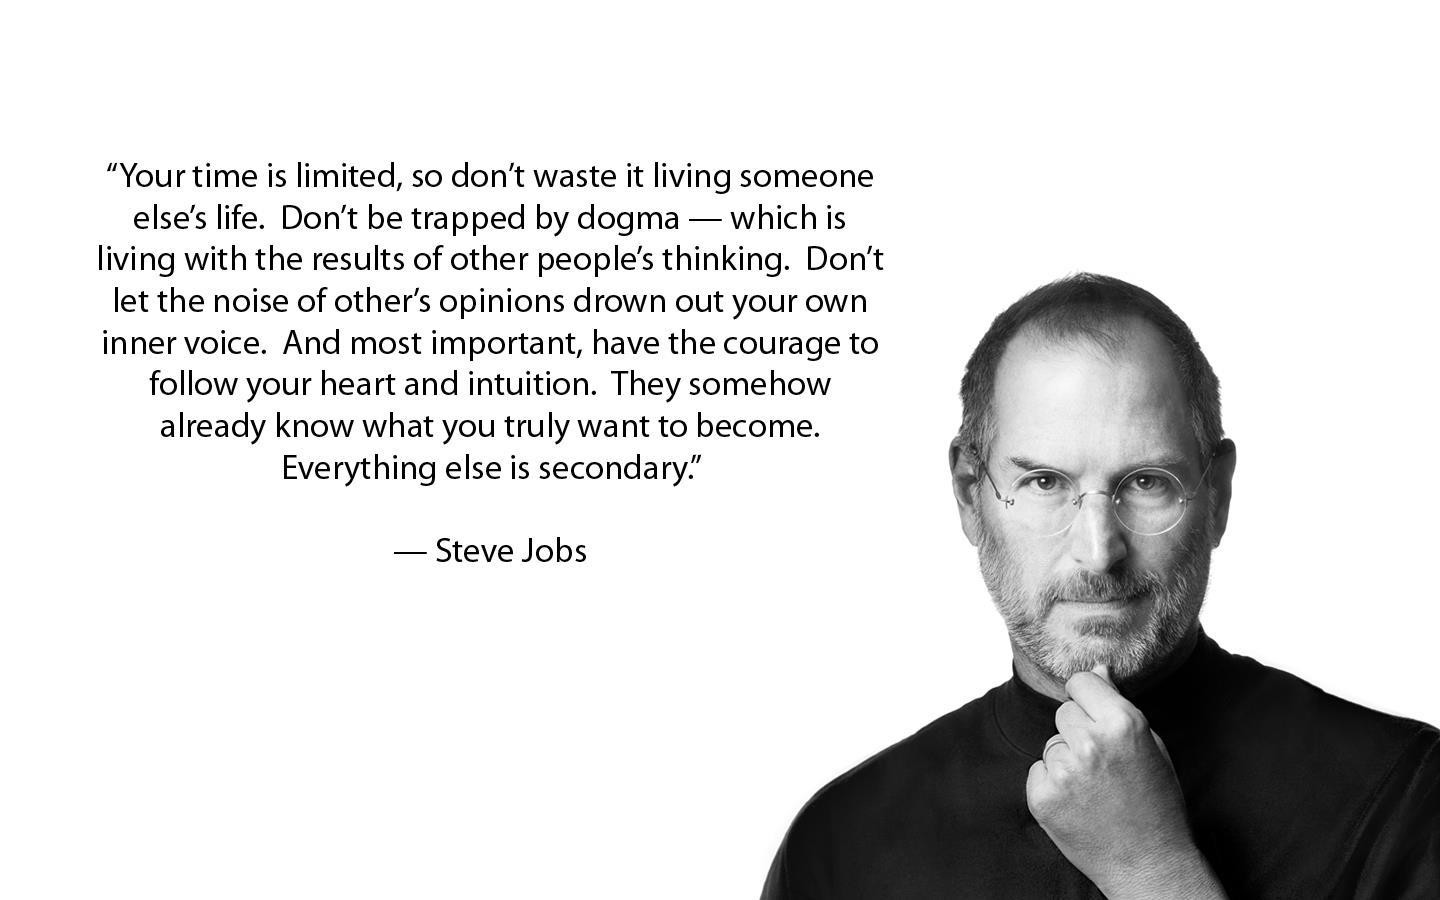 Steve Jobs Motivational Quotes
 Remembering Steve Jobs Inspirational Quotes – Leading To